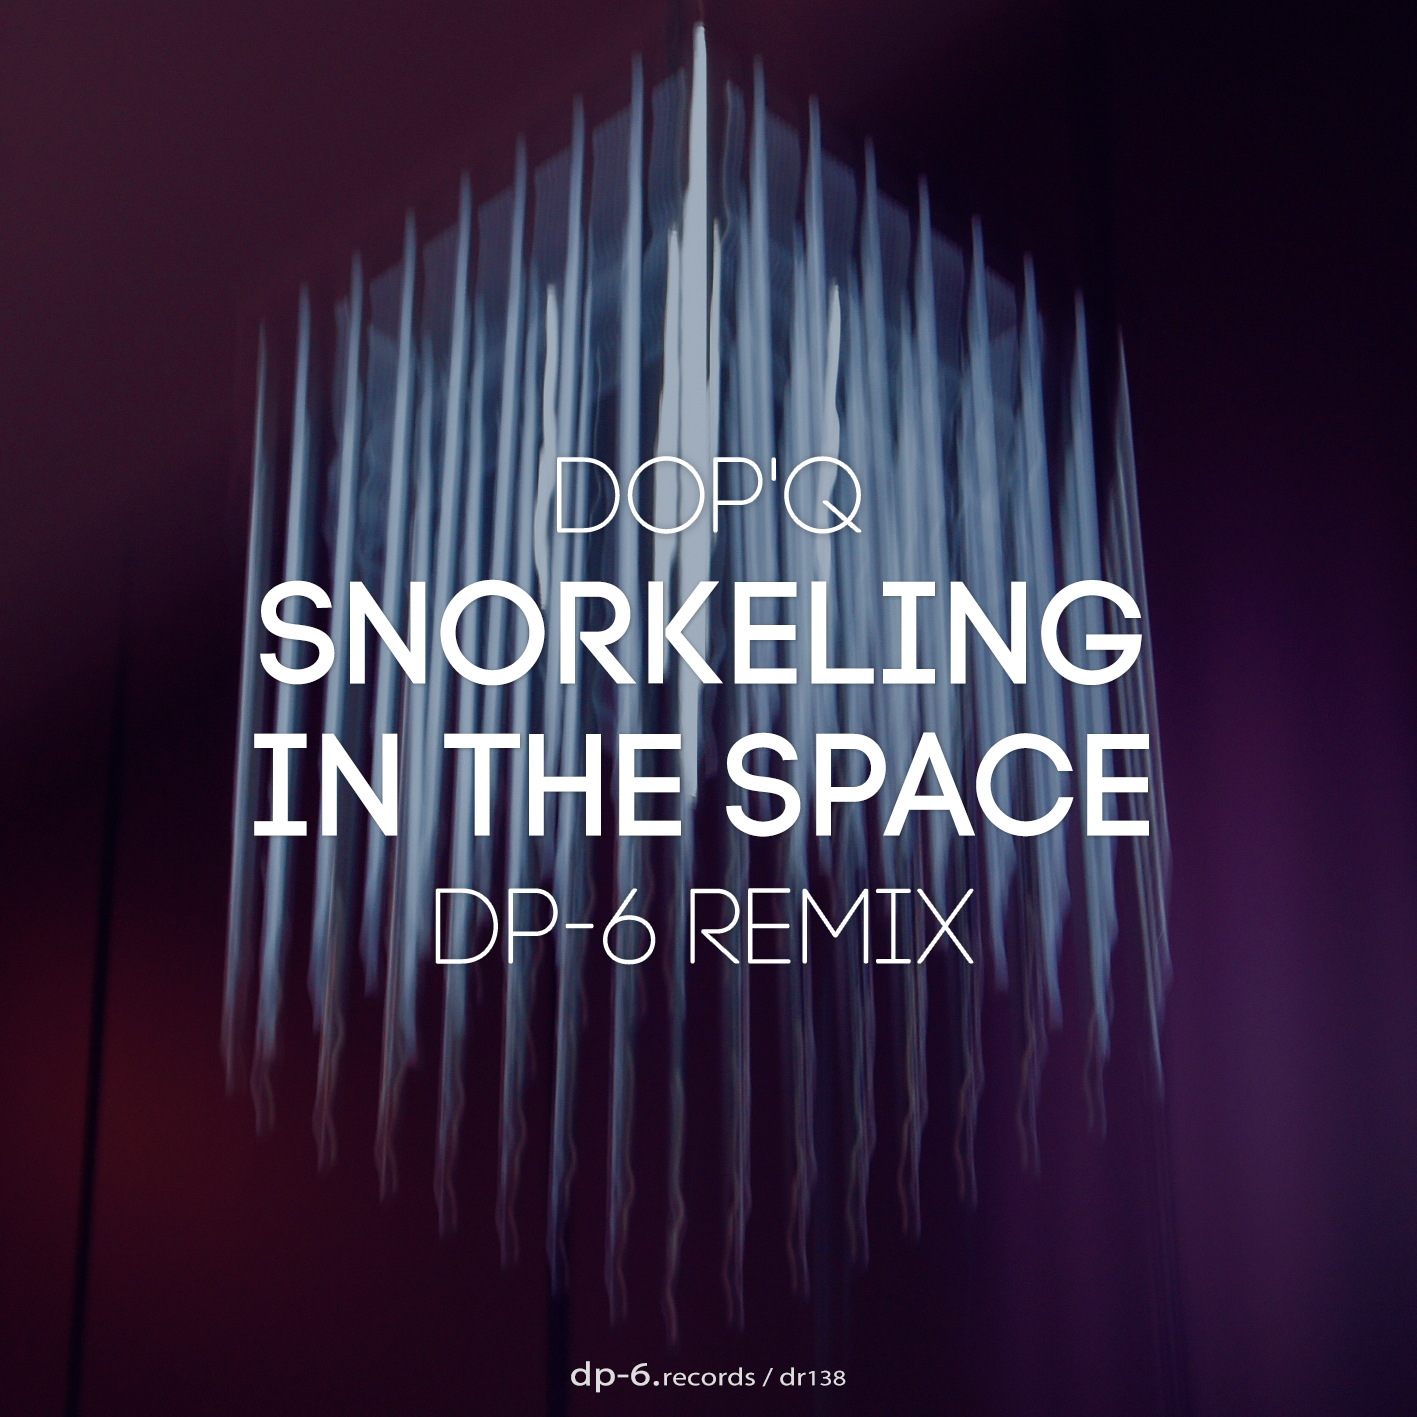 DR138 Dop'q: Snorkeling in the space (DP-6 remix)